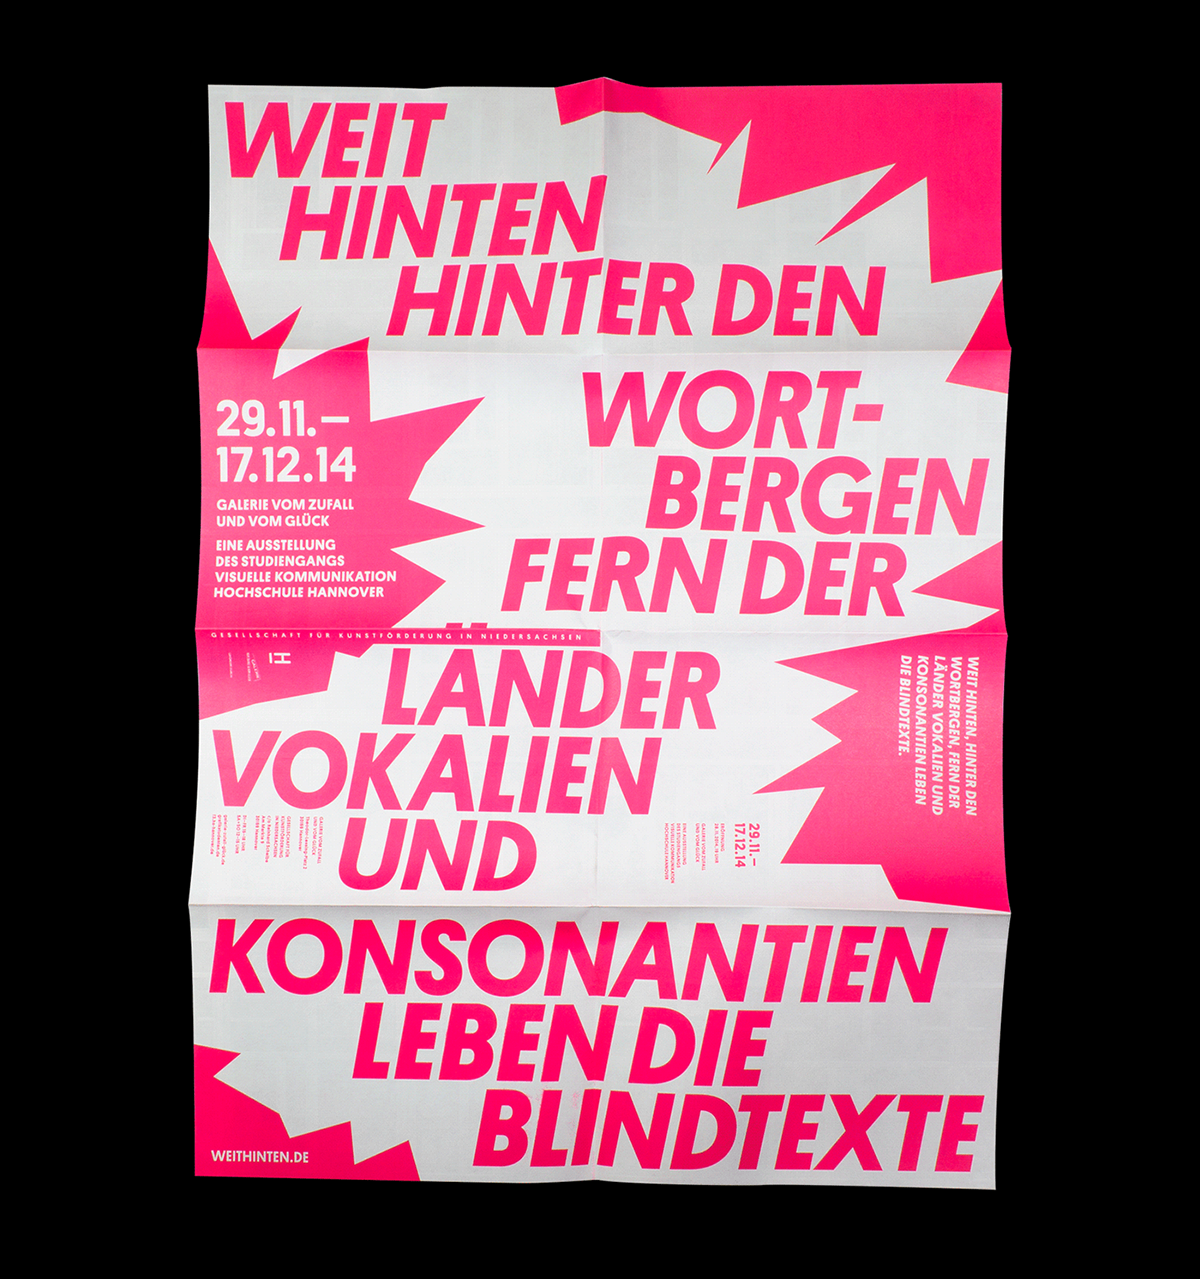 cube hannover Blindtext dummy text Vokalien Diascope font